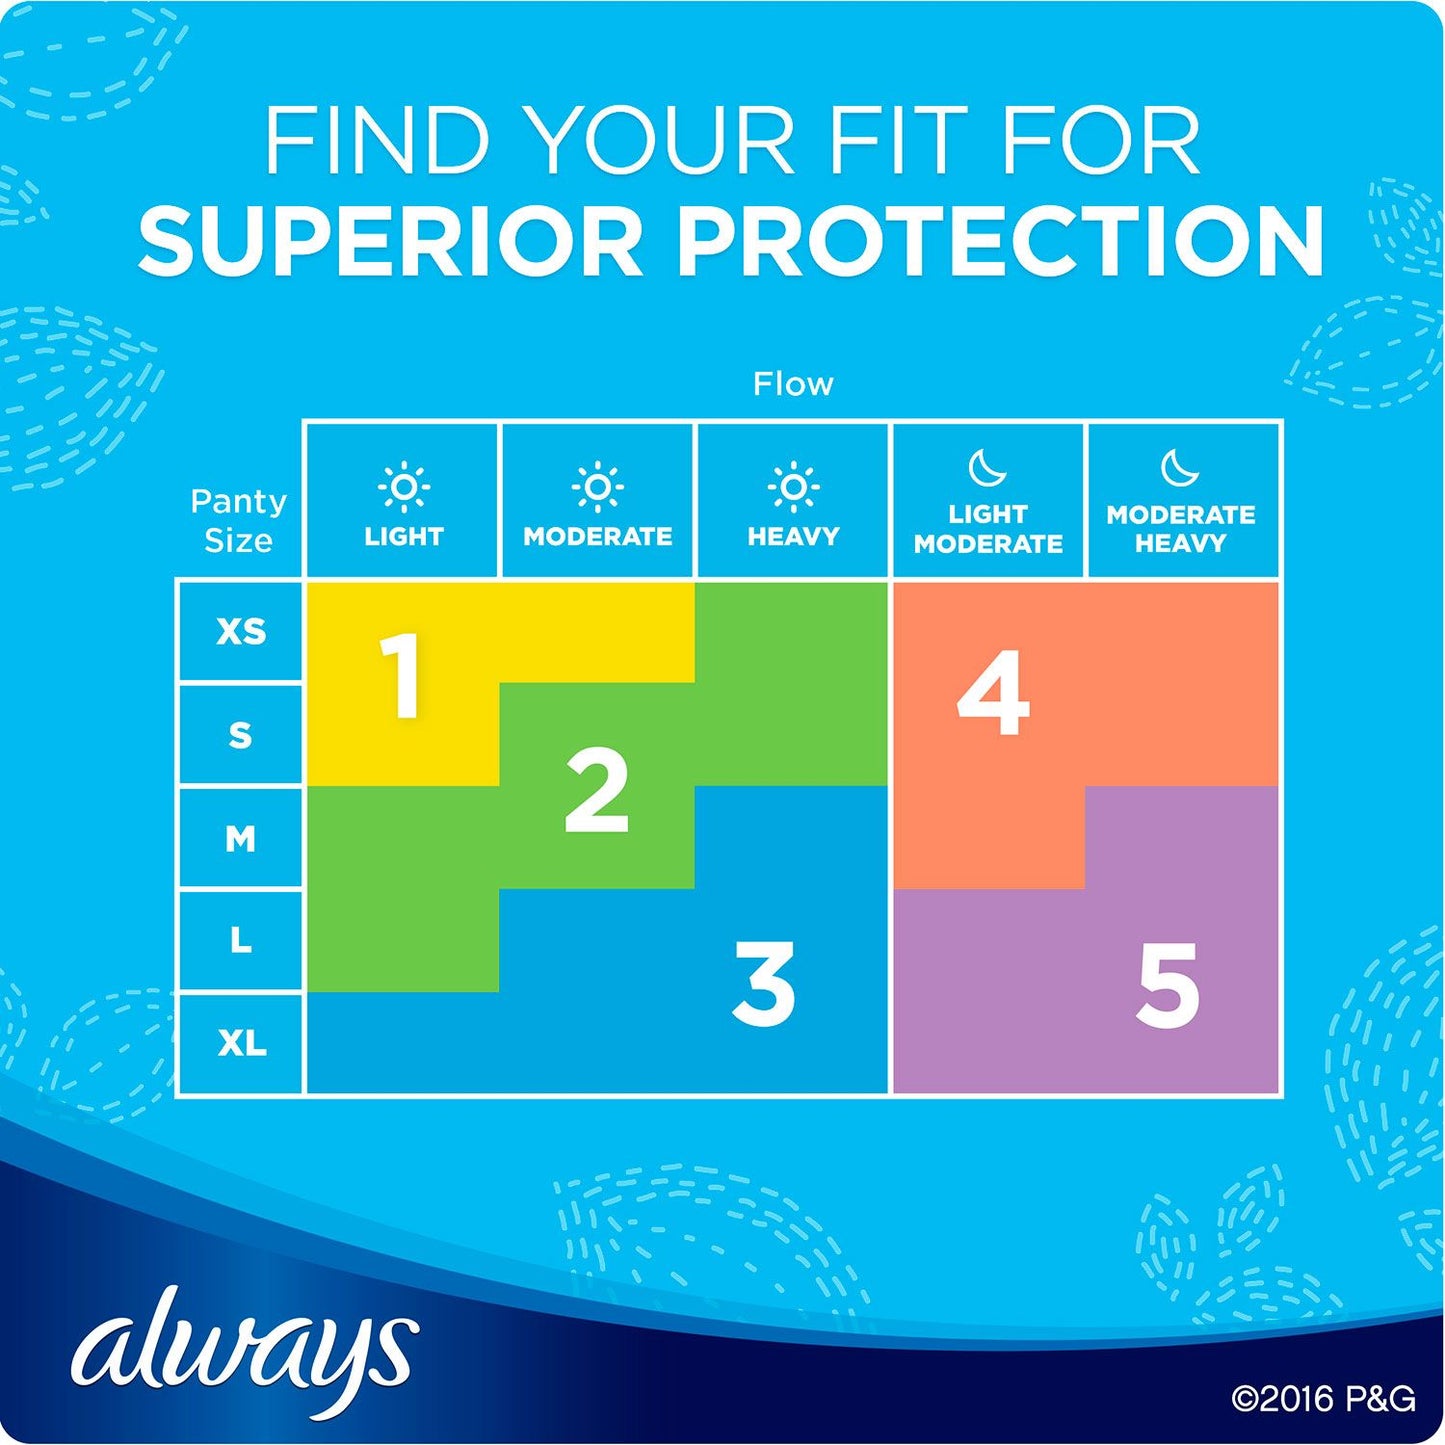 Always Maxi Long Super Pads with Wings (90 ct.)